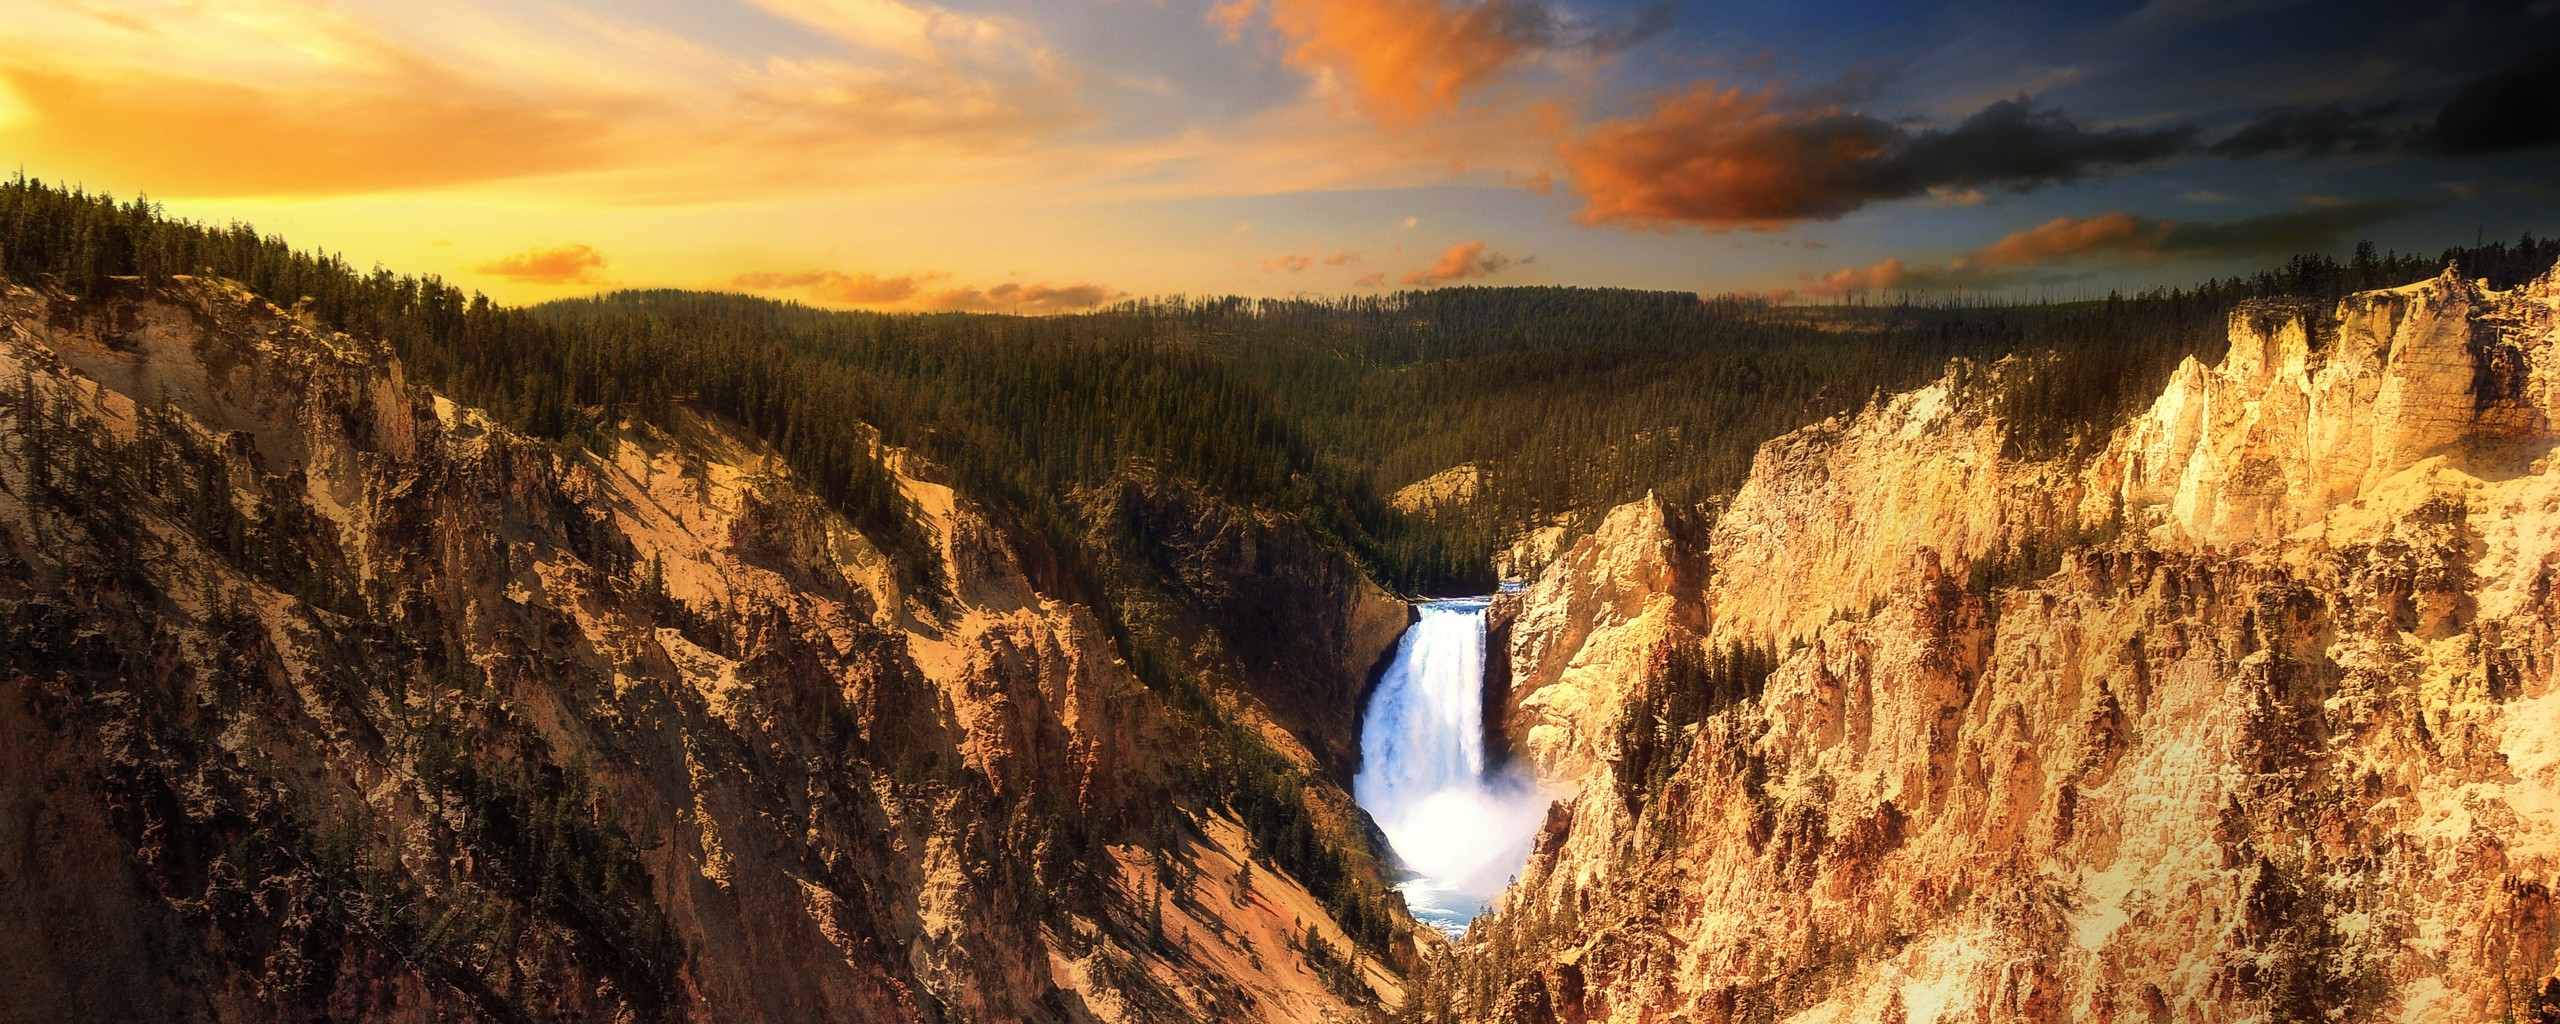 General 2560x1024 Yellowstone National Park landscape waterfall USA nature sky rocks rock formation